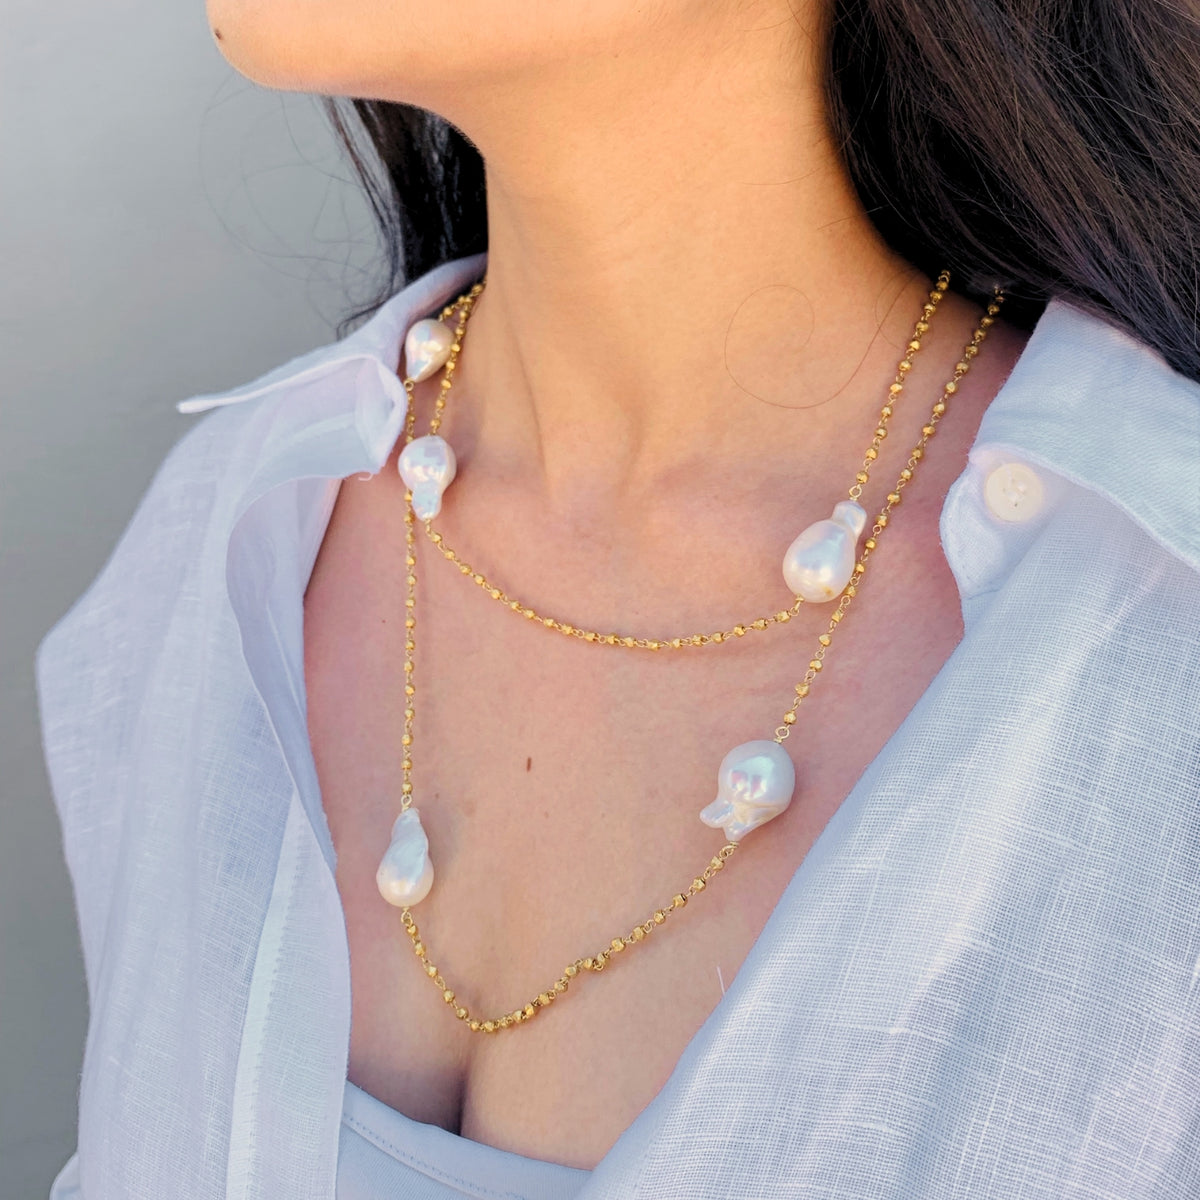 Eurig White Pearl Long Necklace